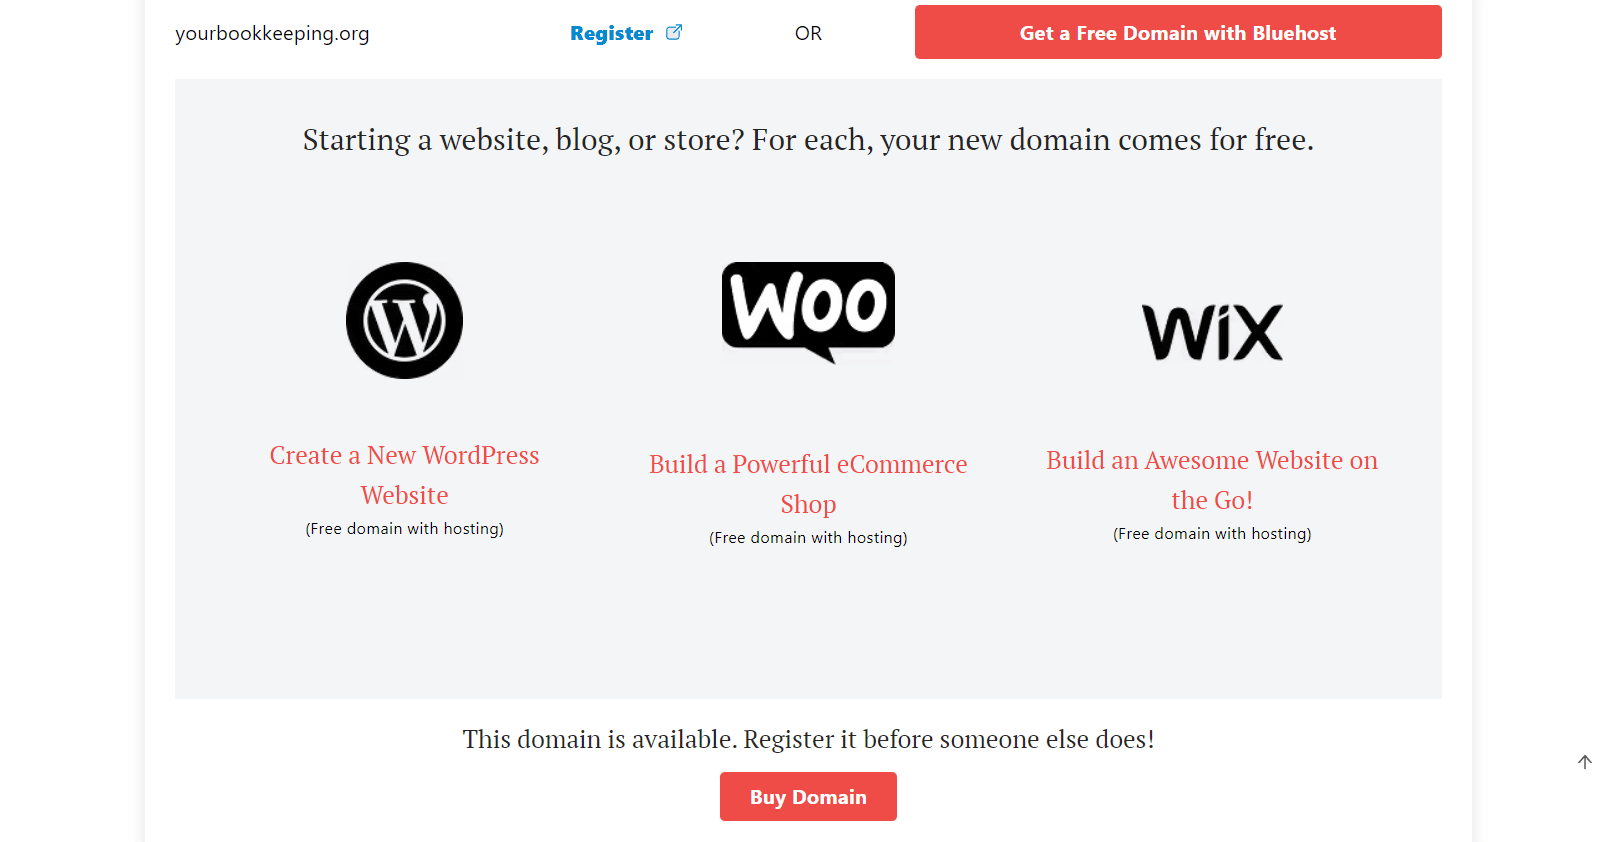 DomainWheel bookkeeper business names generator "View Details" area with information about WordPress, WooCommerce, and Wix